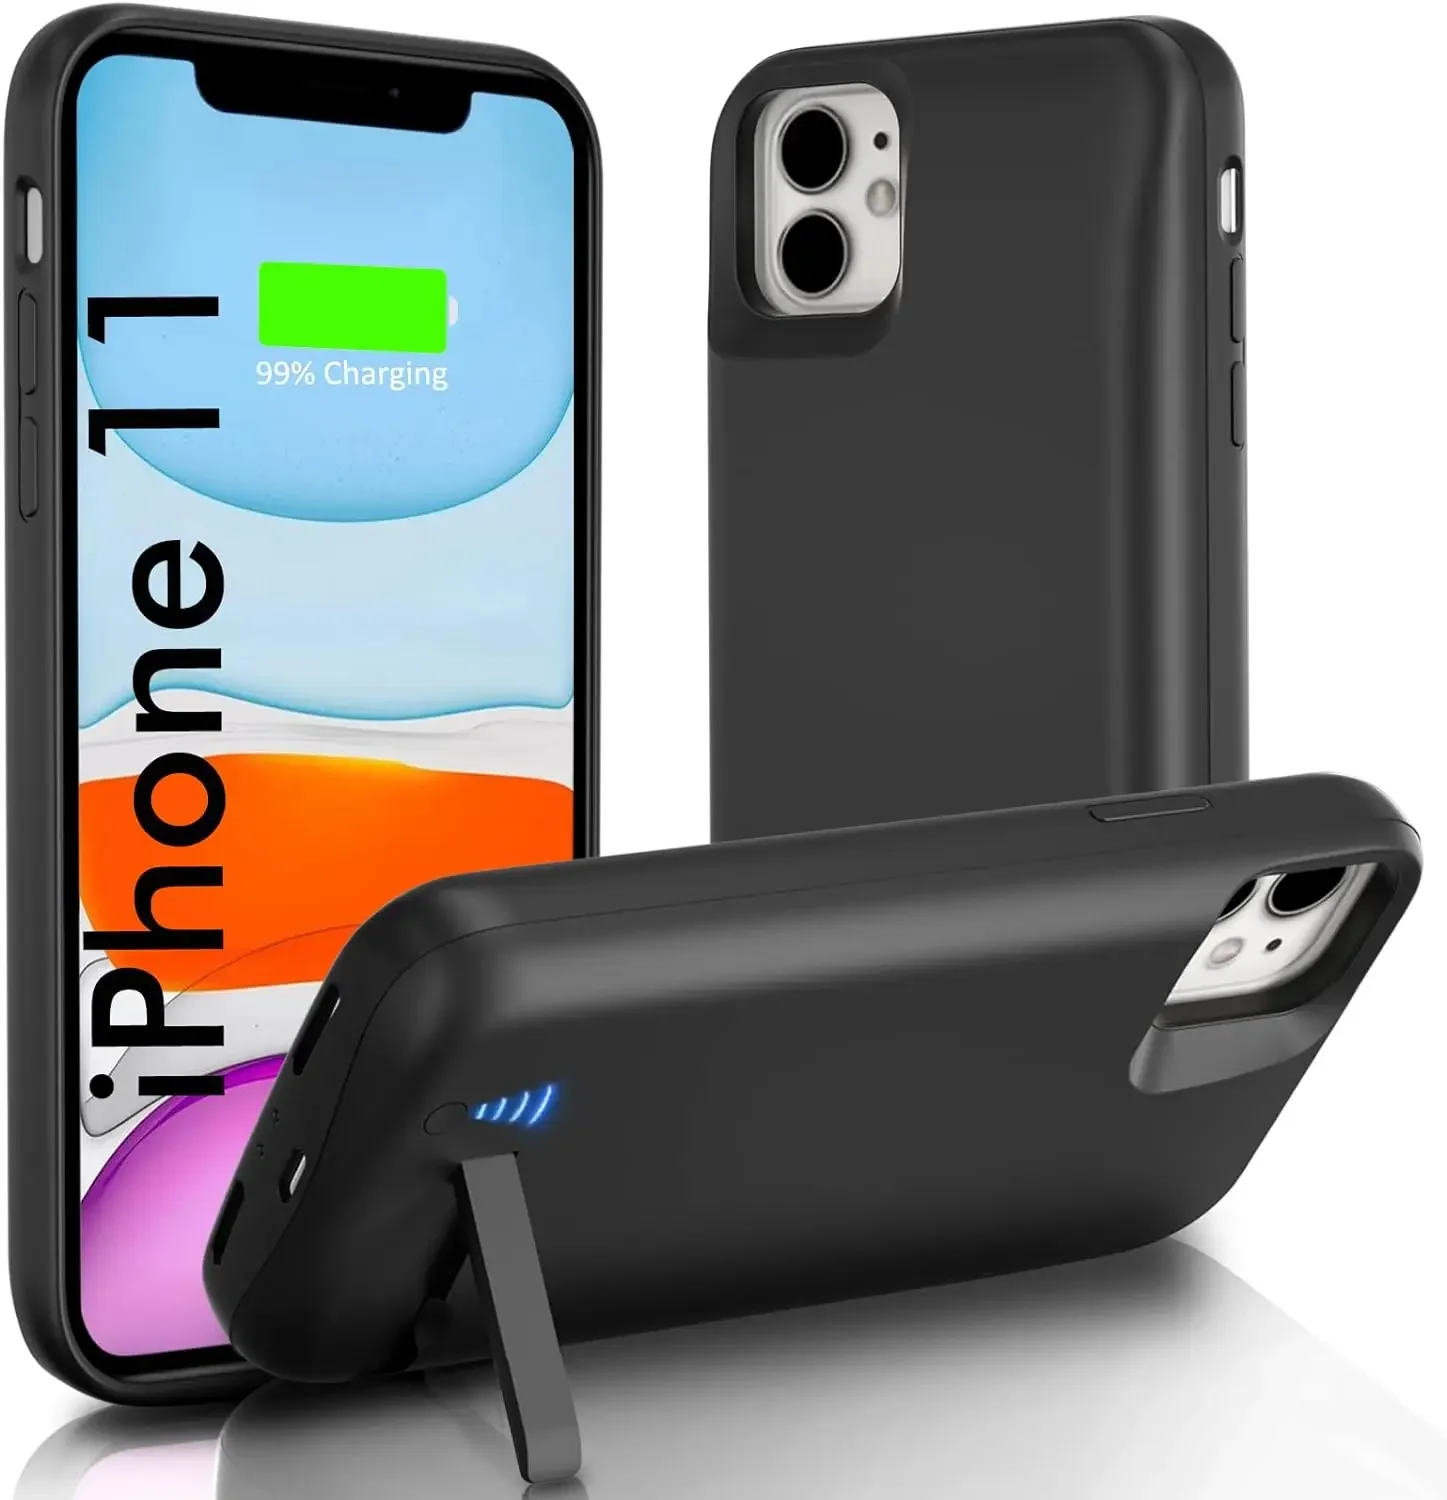 

6000mAh Battery Case for iPhone 11 Portable power bank Extended Charging Case with Kickstand phone case with built in battery